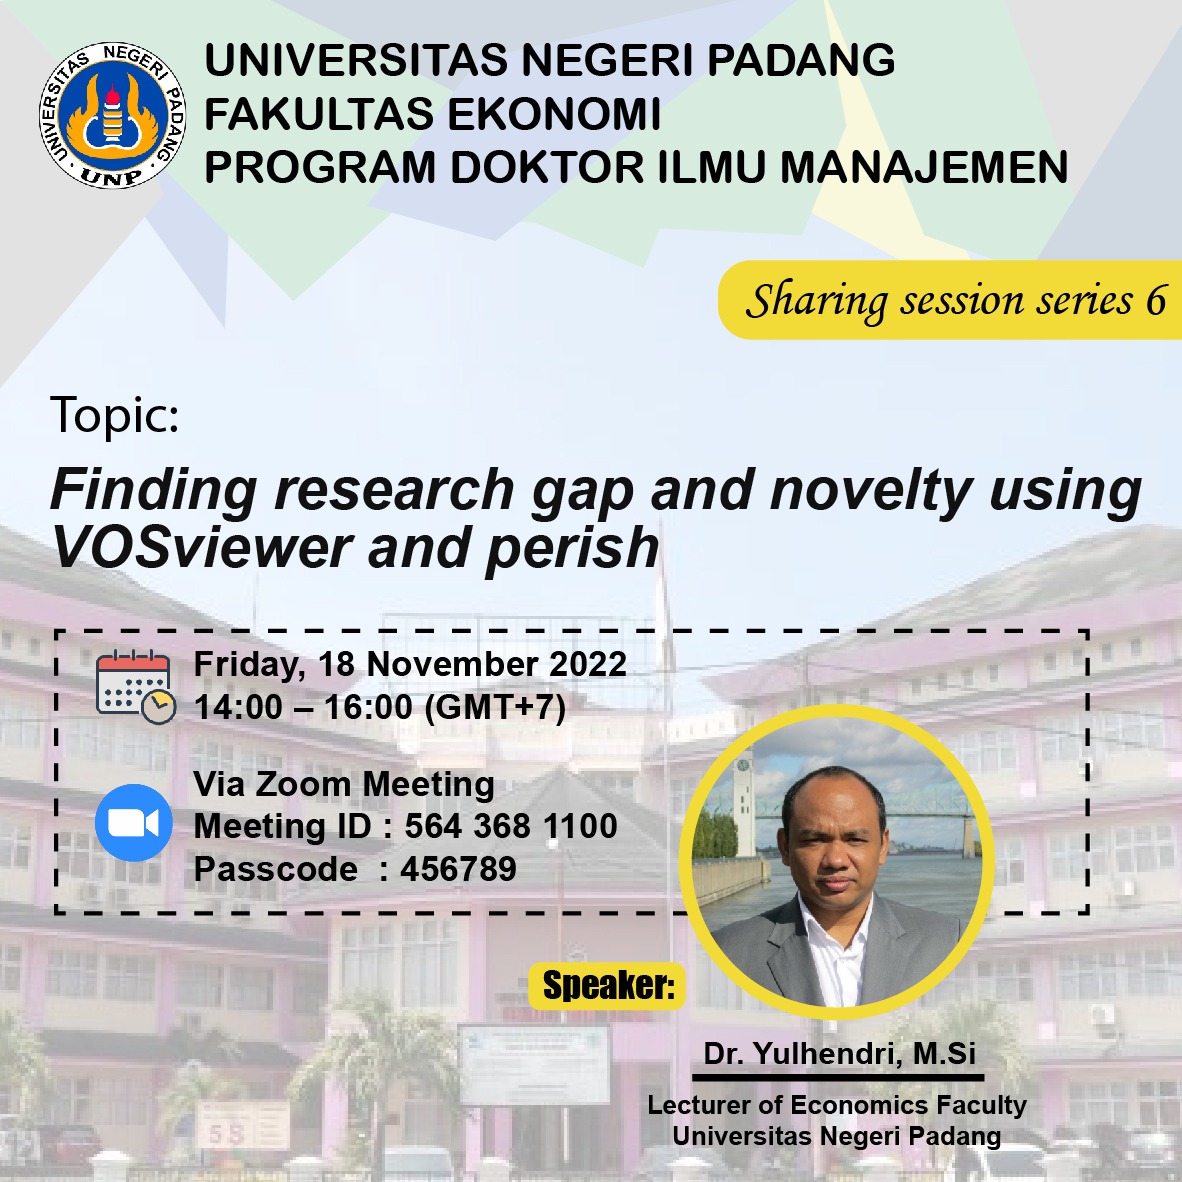 Sharing session 6 with Dr. Yulhendri, M.Si